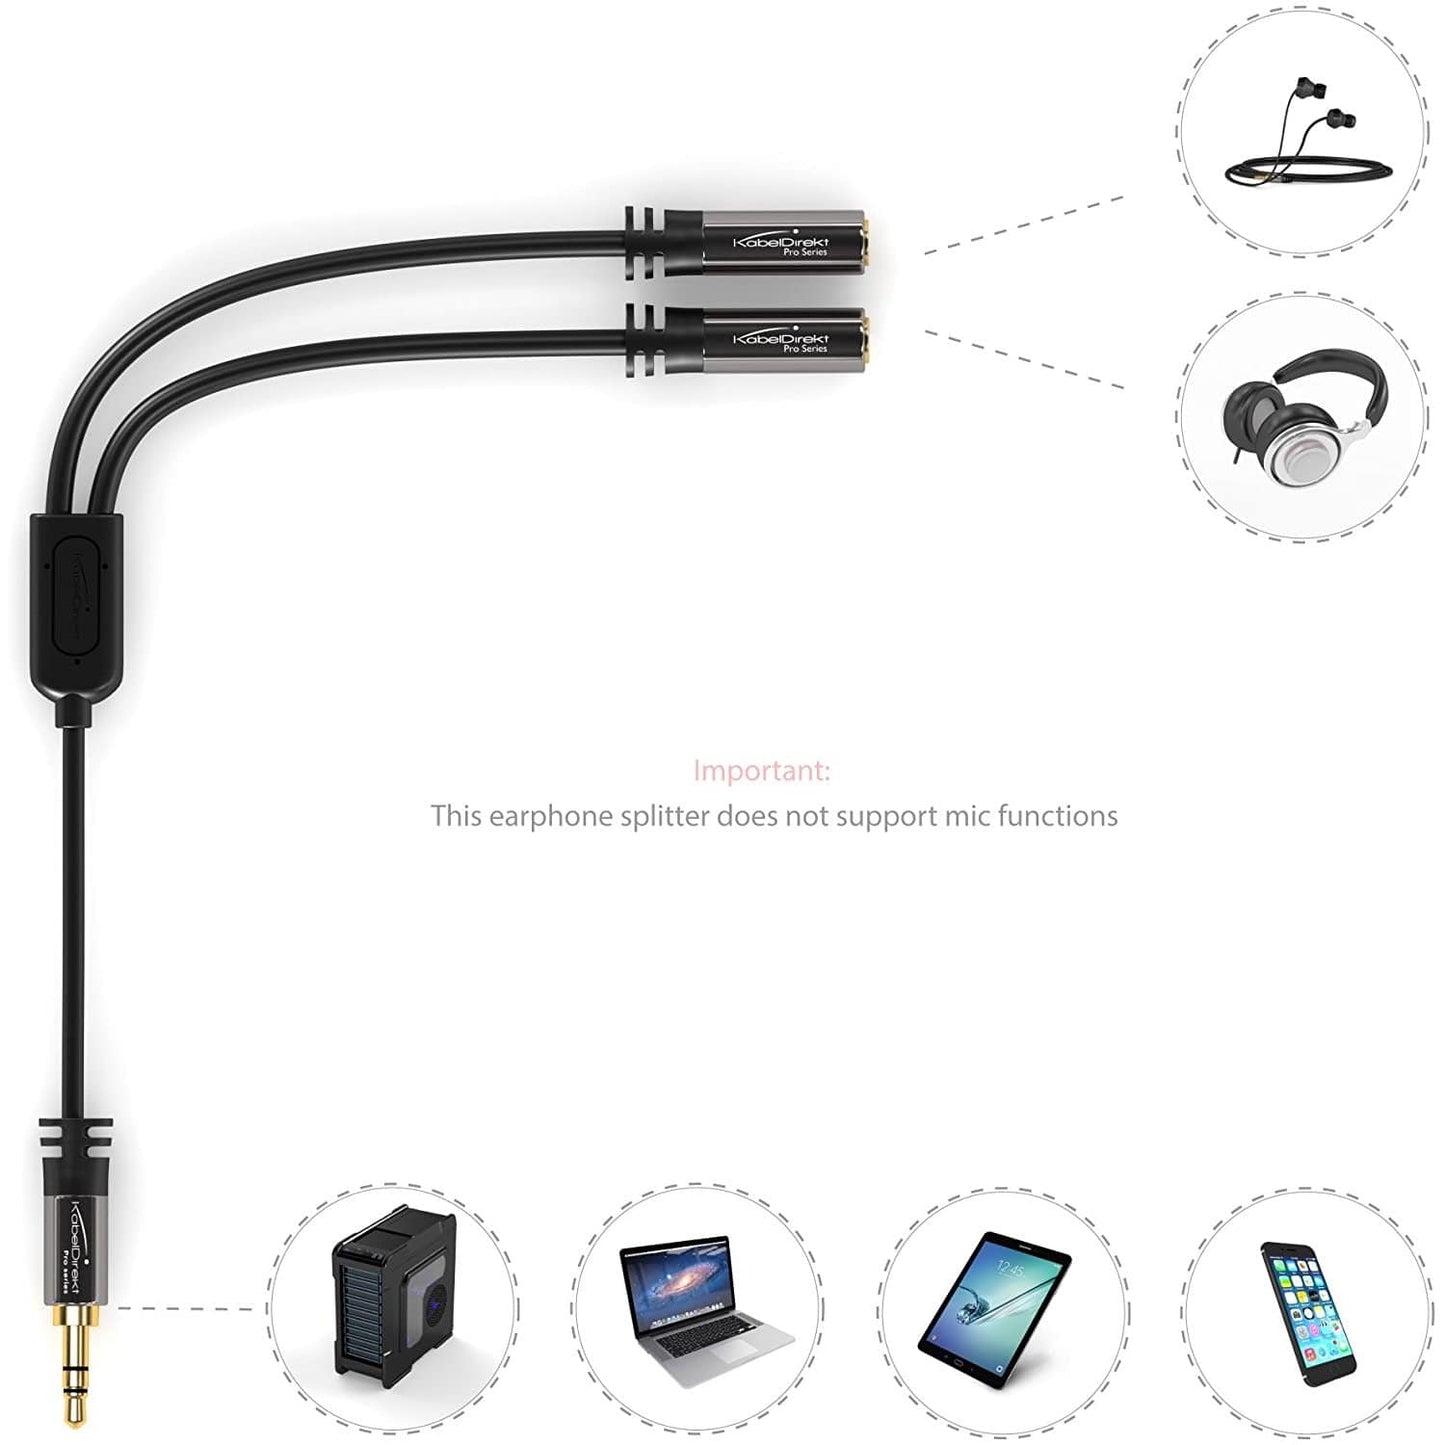 3.5mm Y adapter - jack splitter cable for two headphones, 1×3.5mm male to 2×3.5mm female